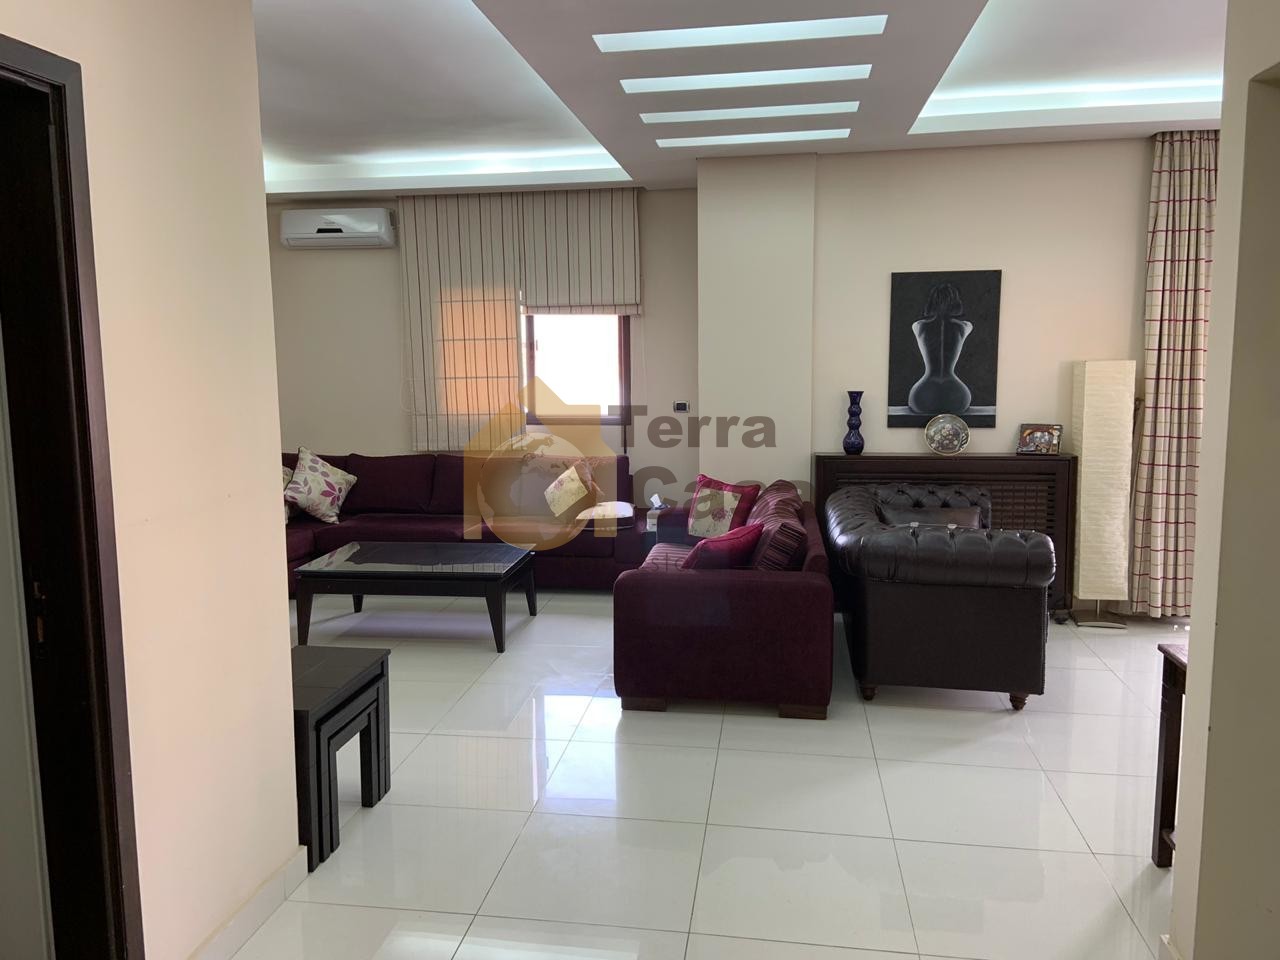 Apartment for sale in zahle haouch el omara stargarte fully furnished.